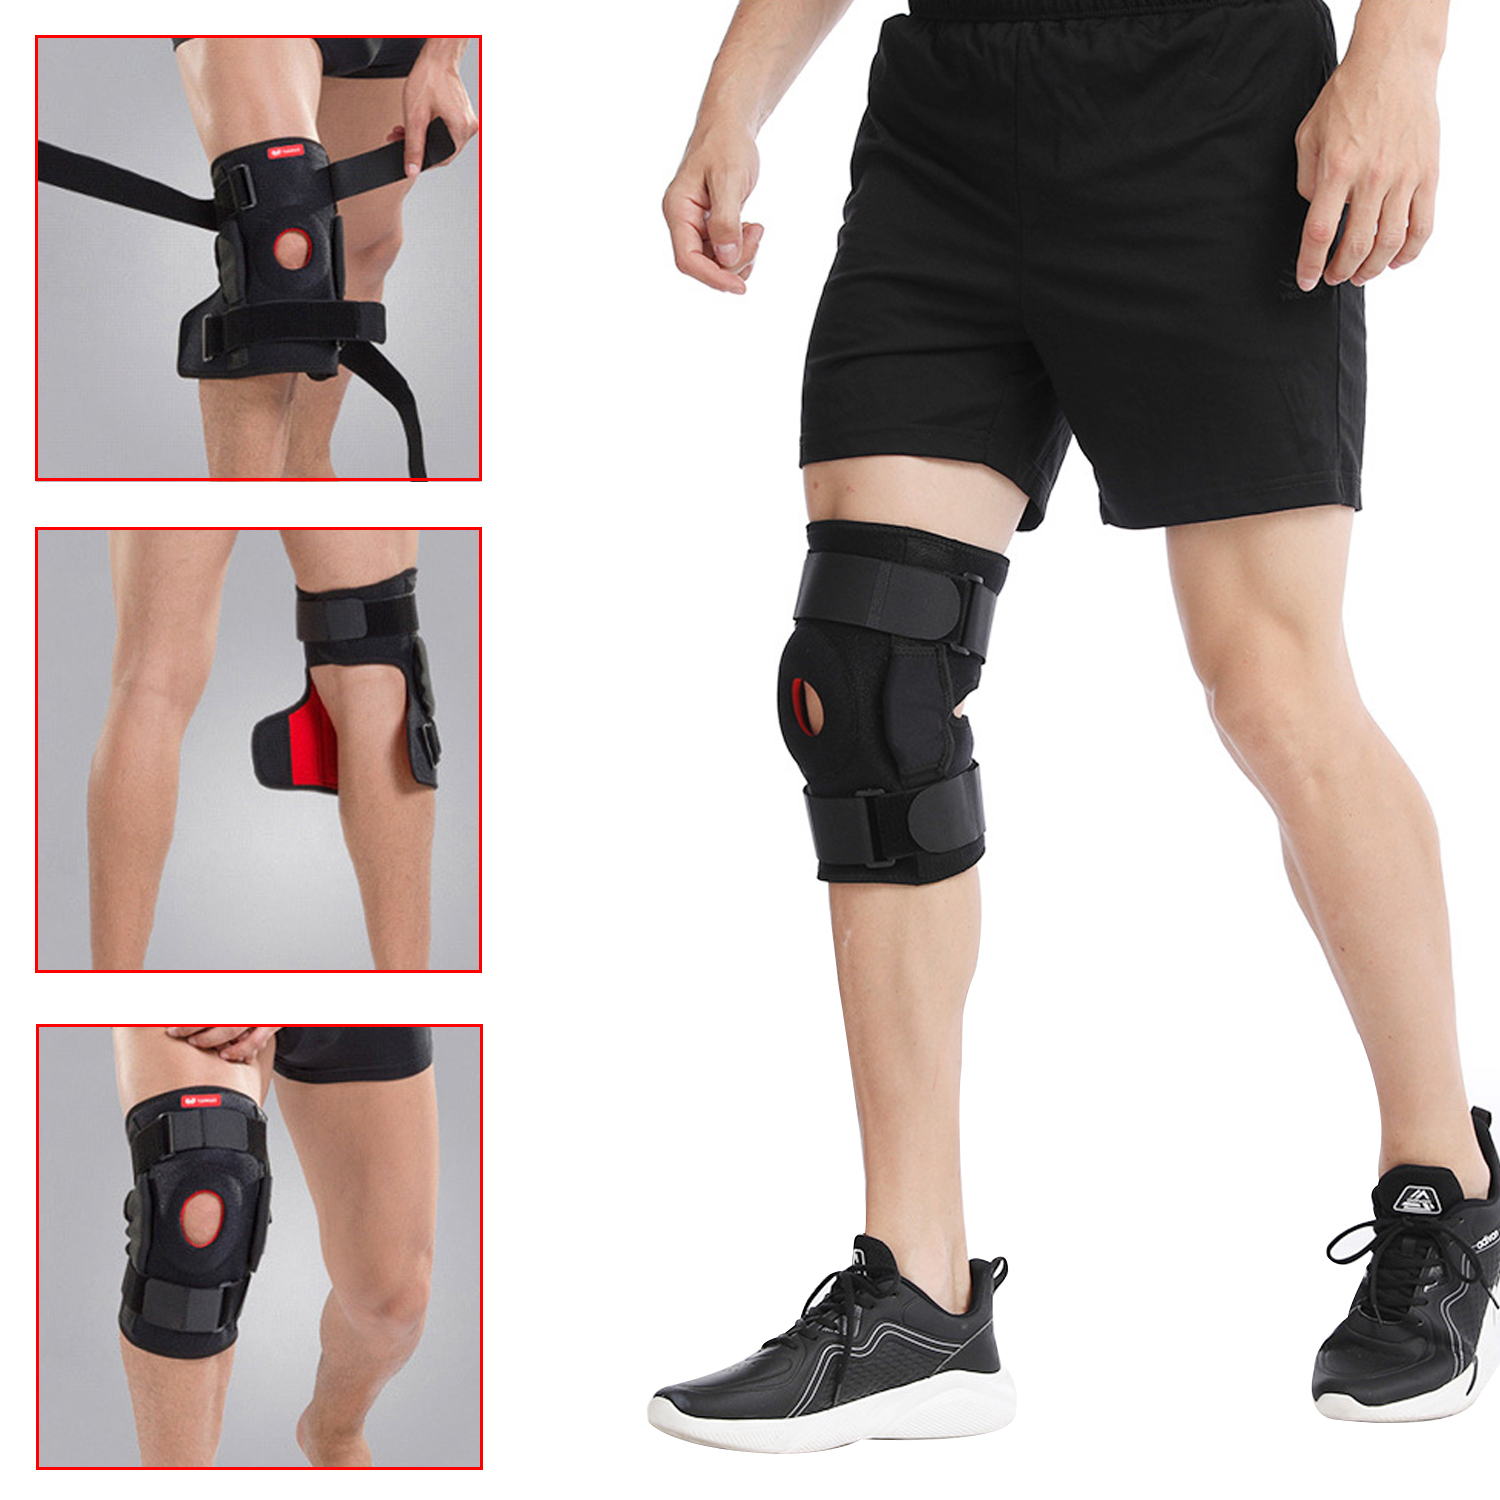 Removable Folding Support Knee Pads Silicone Patella Knee Pads Knee Support Brace Immobilizer Knee Braces Pads